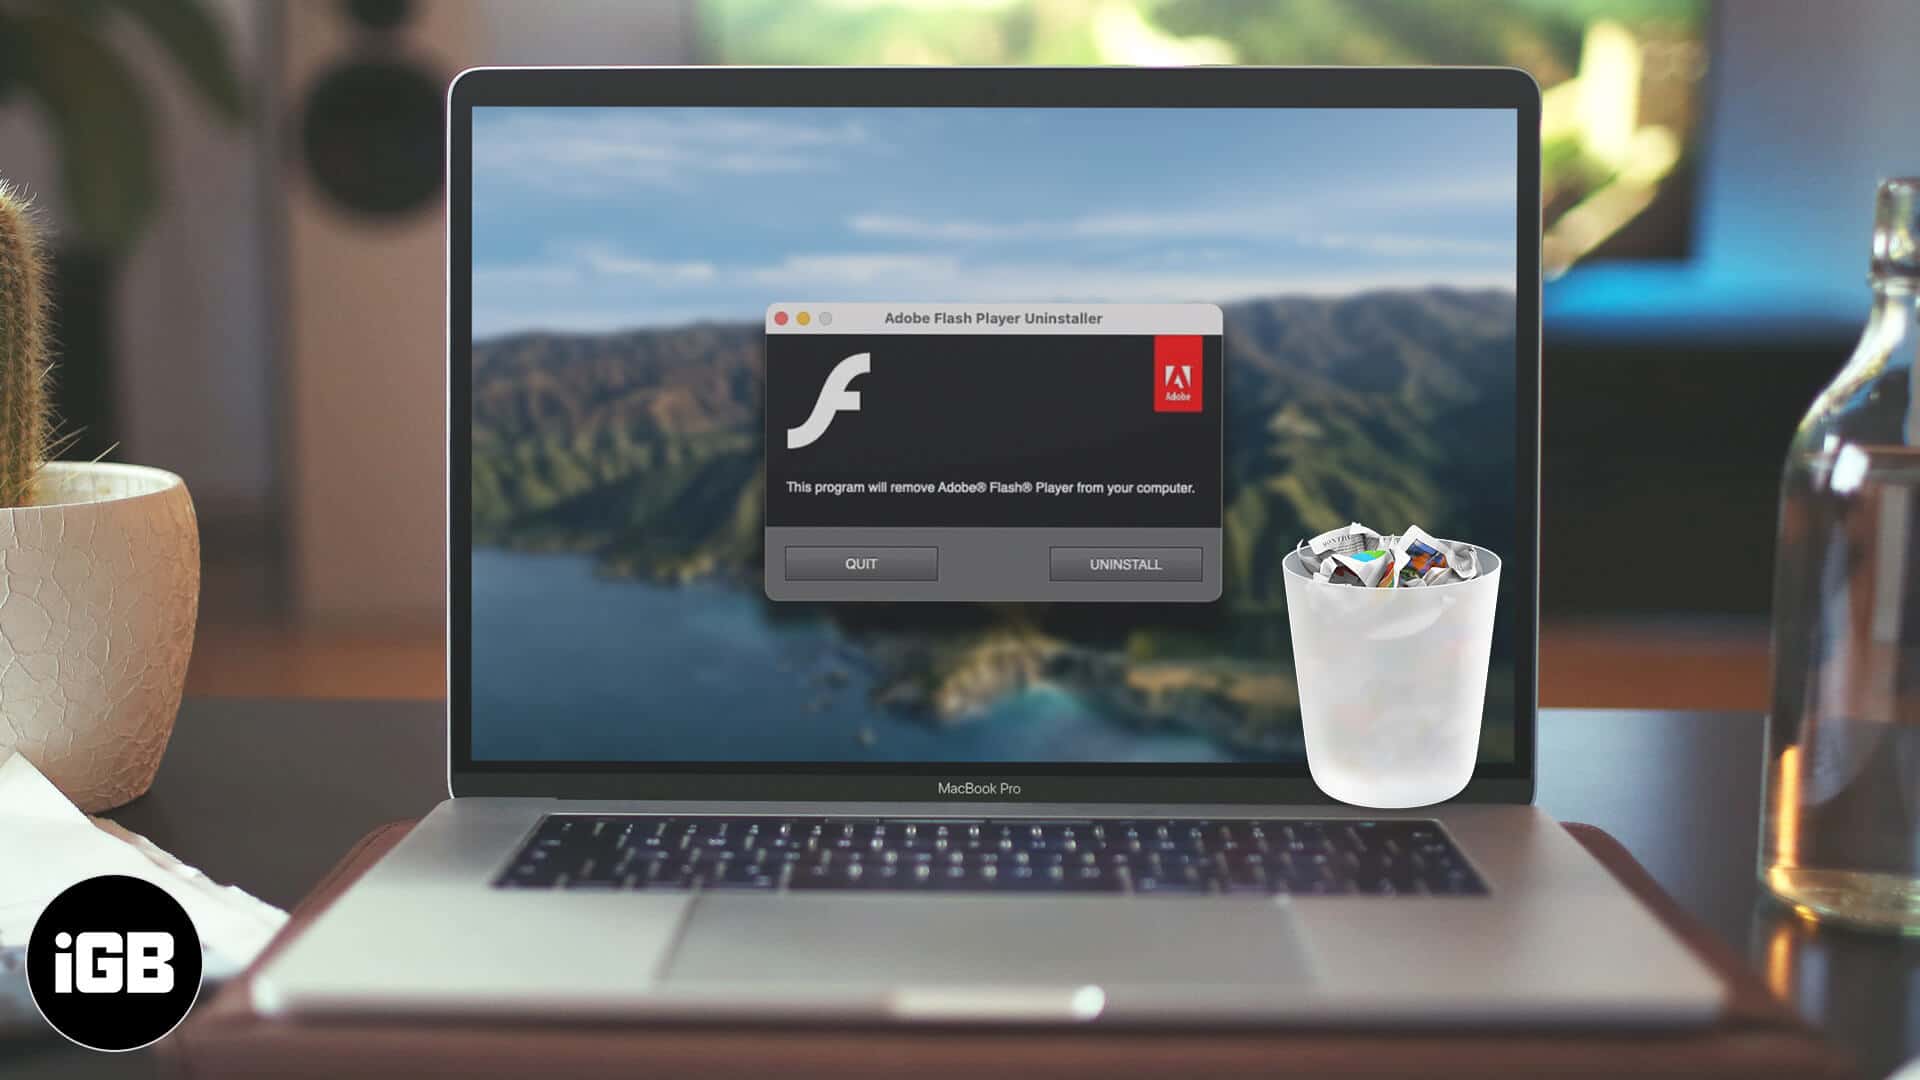 How to uninstall adobe flash player on mac